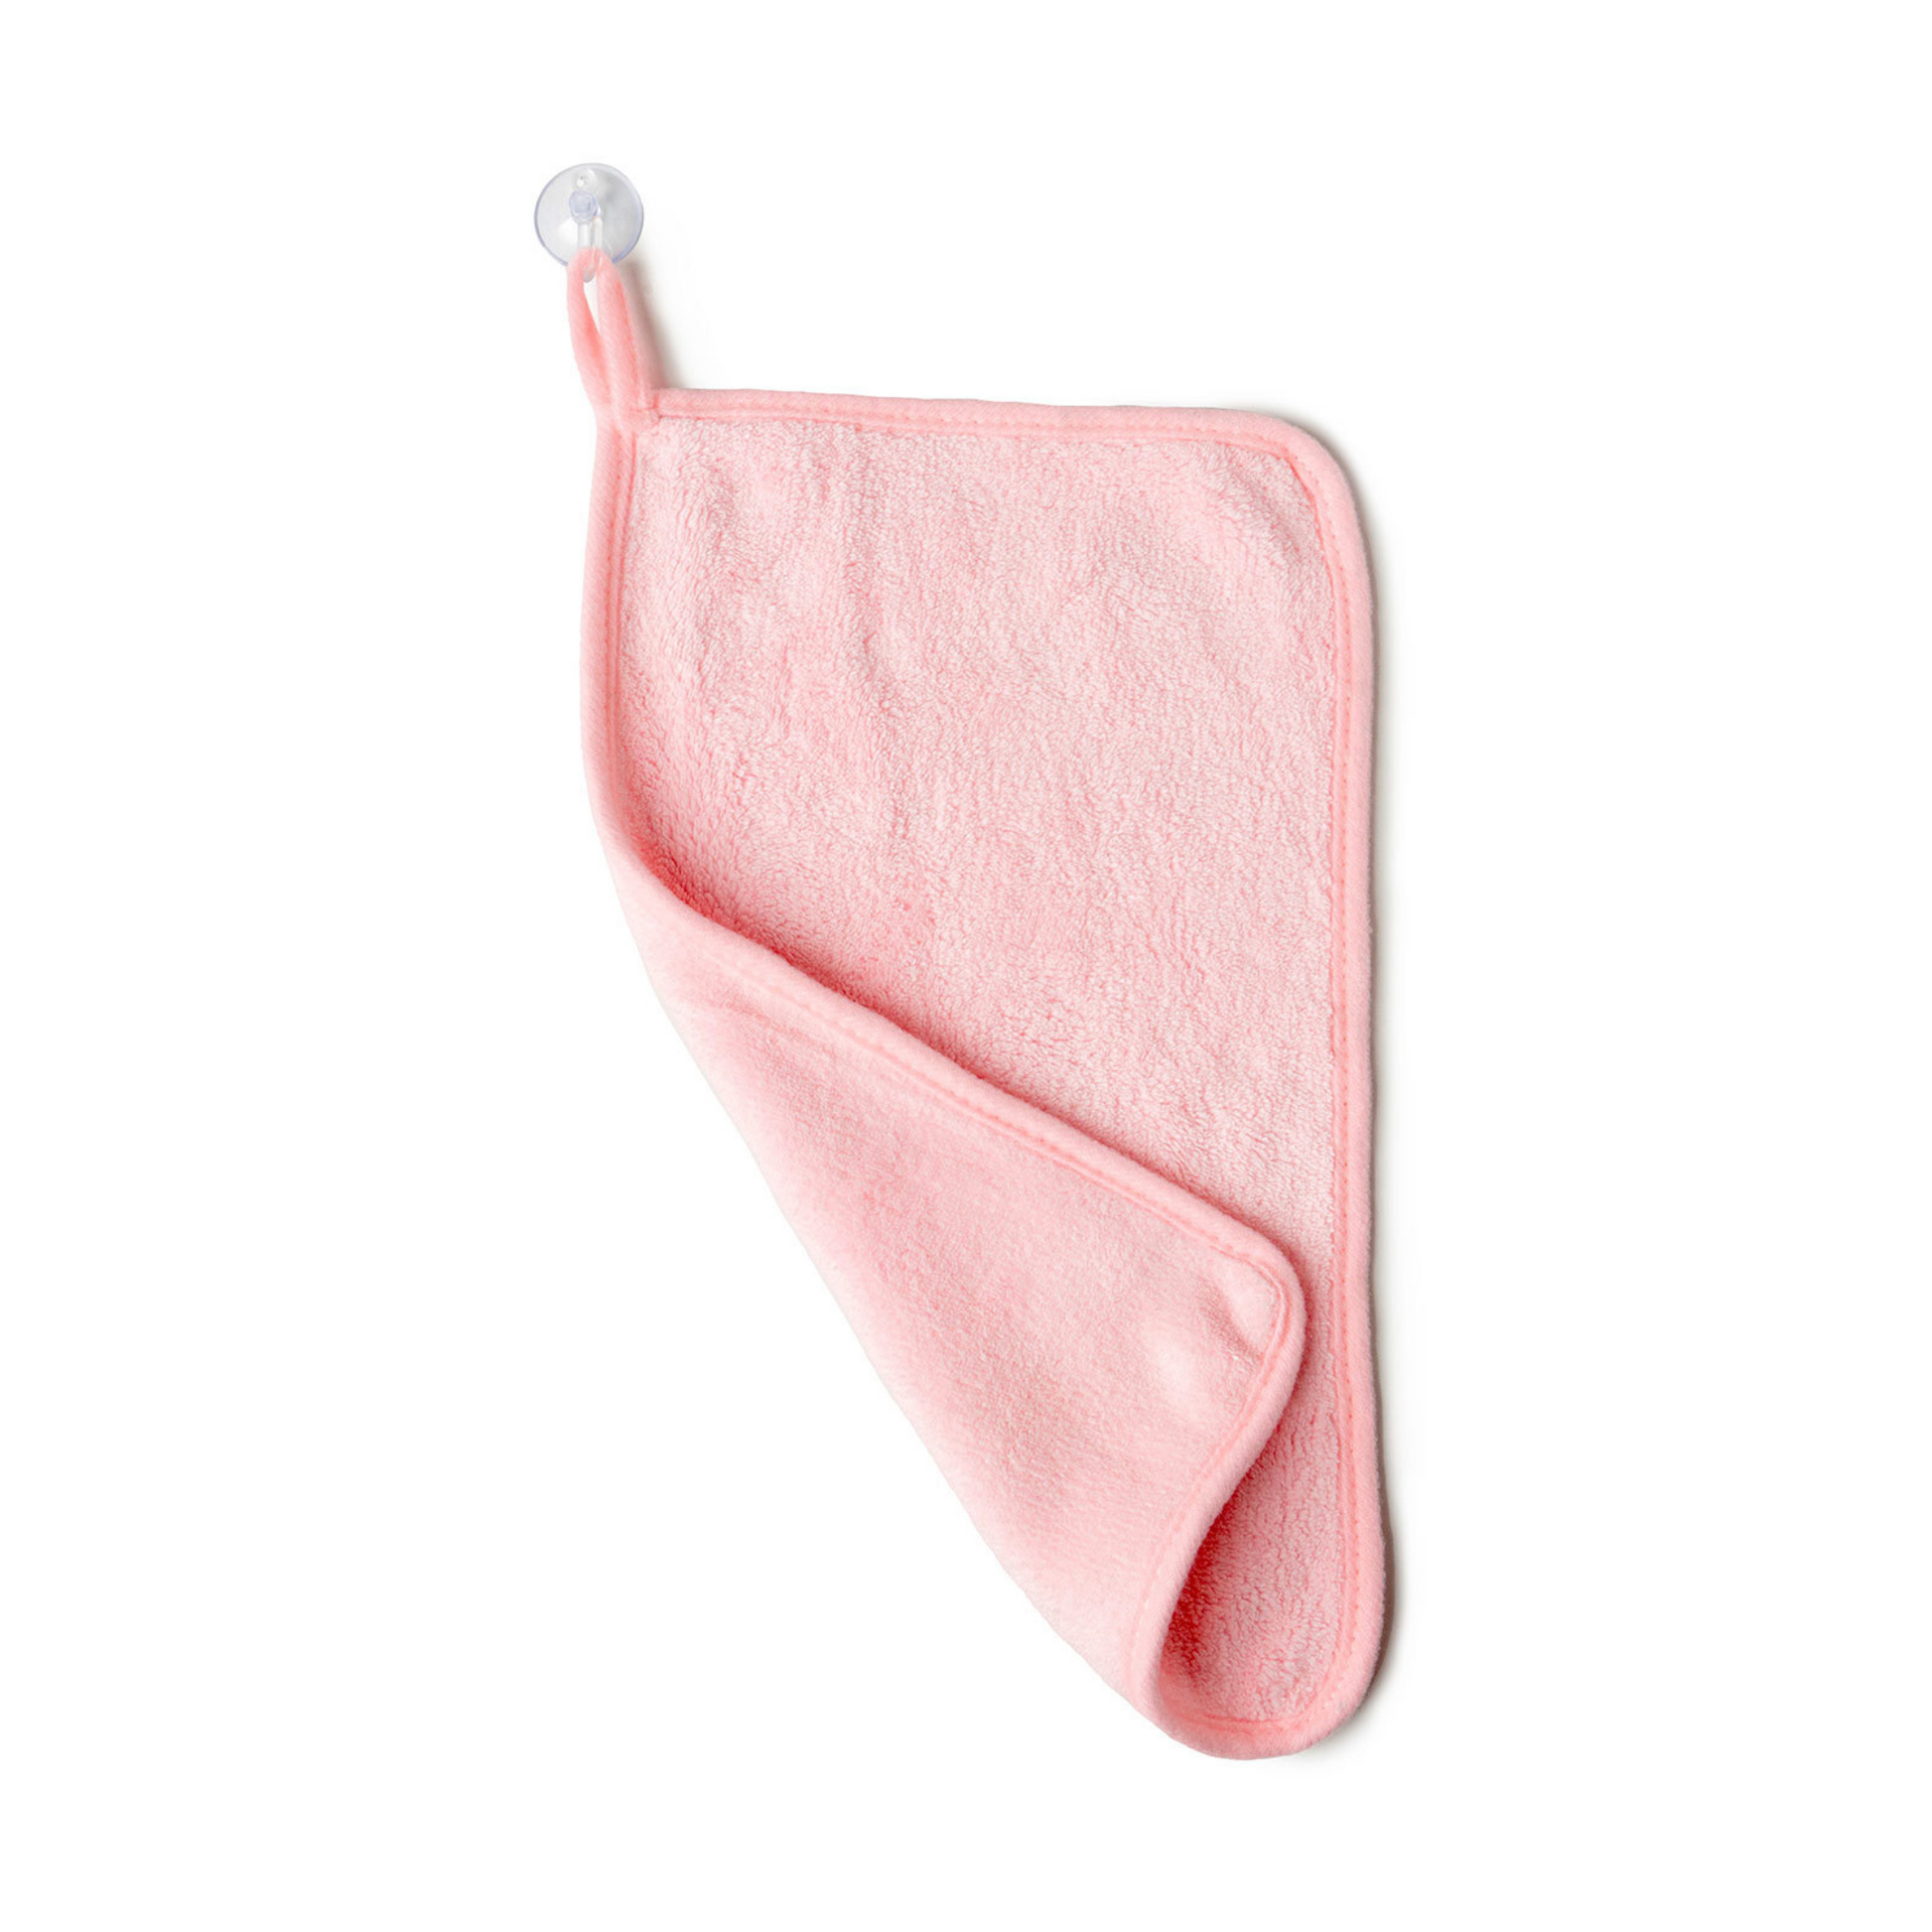 Water Works makeup removing towel in pink